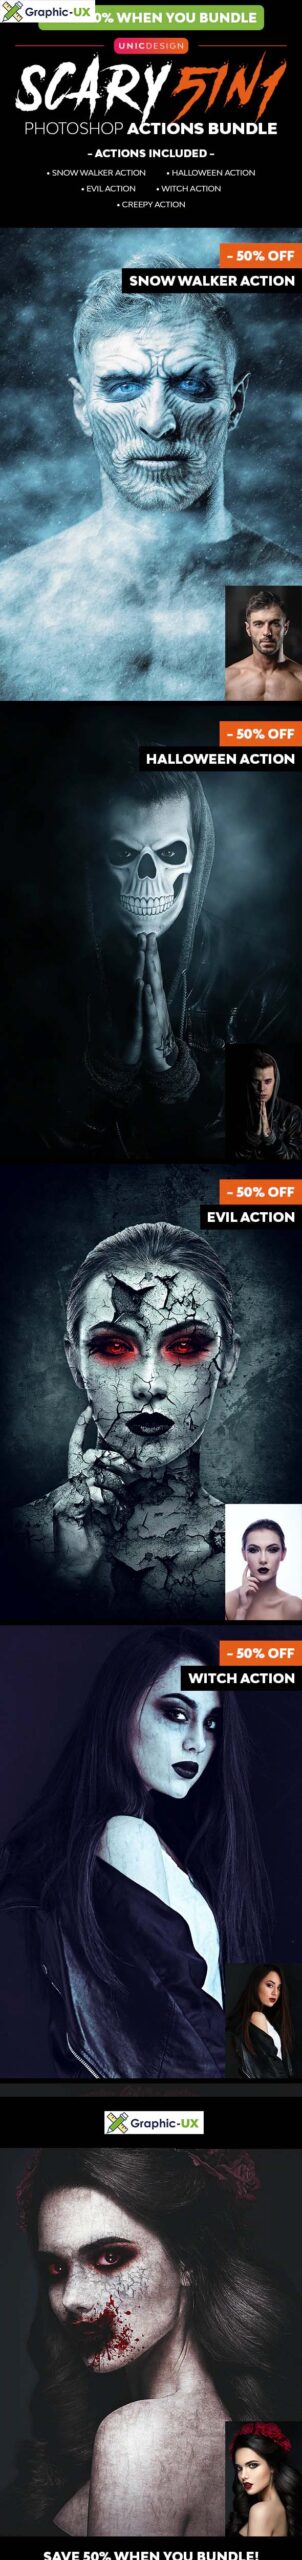 Scary Photoshop Actions 5in1 Bundle 